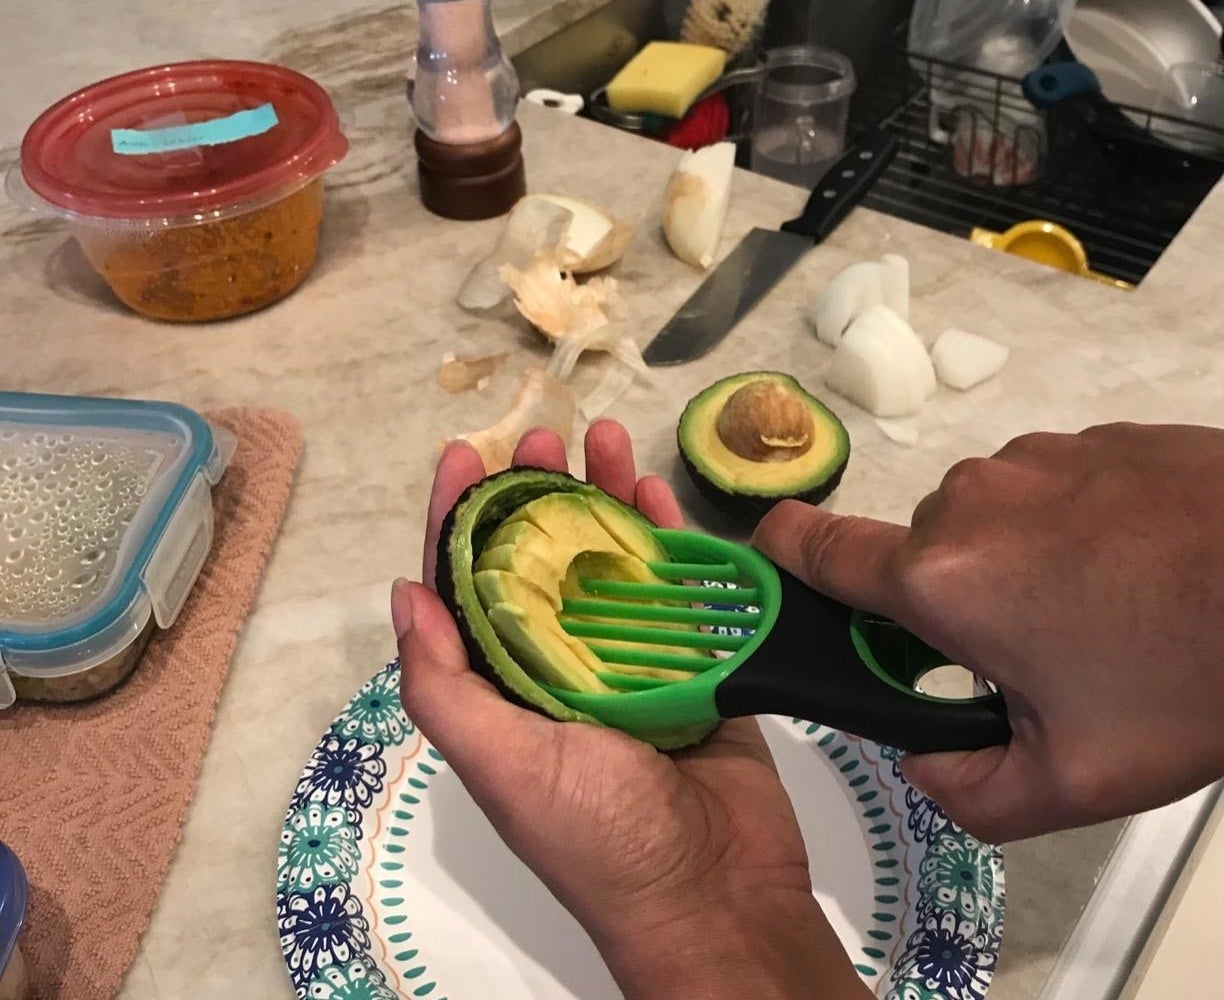 Reviewer slicing avocado with product